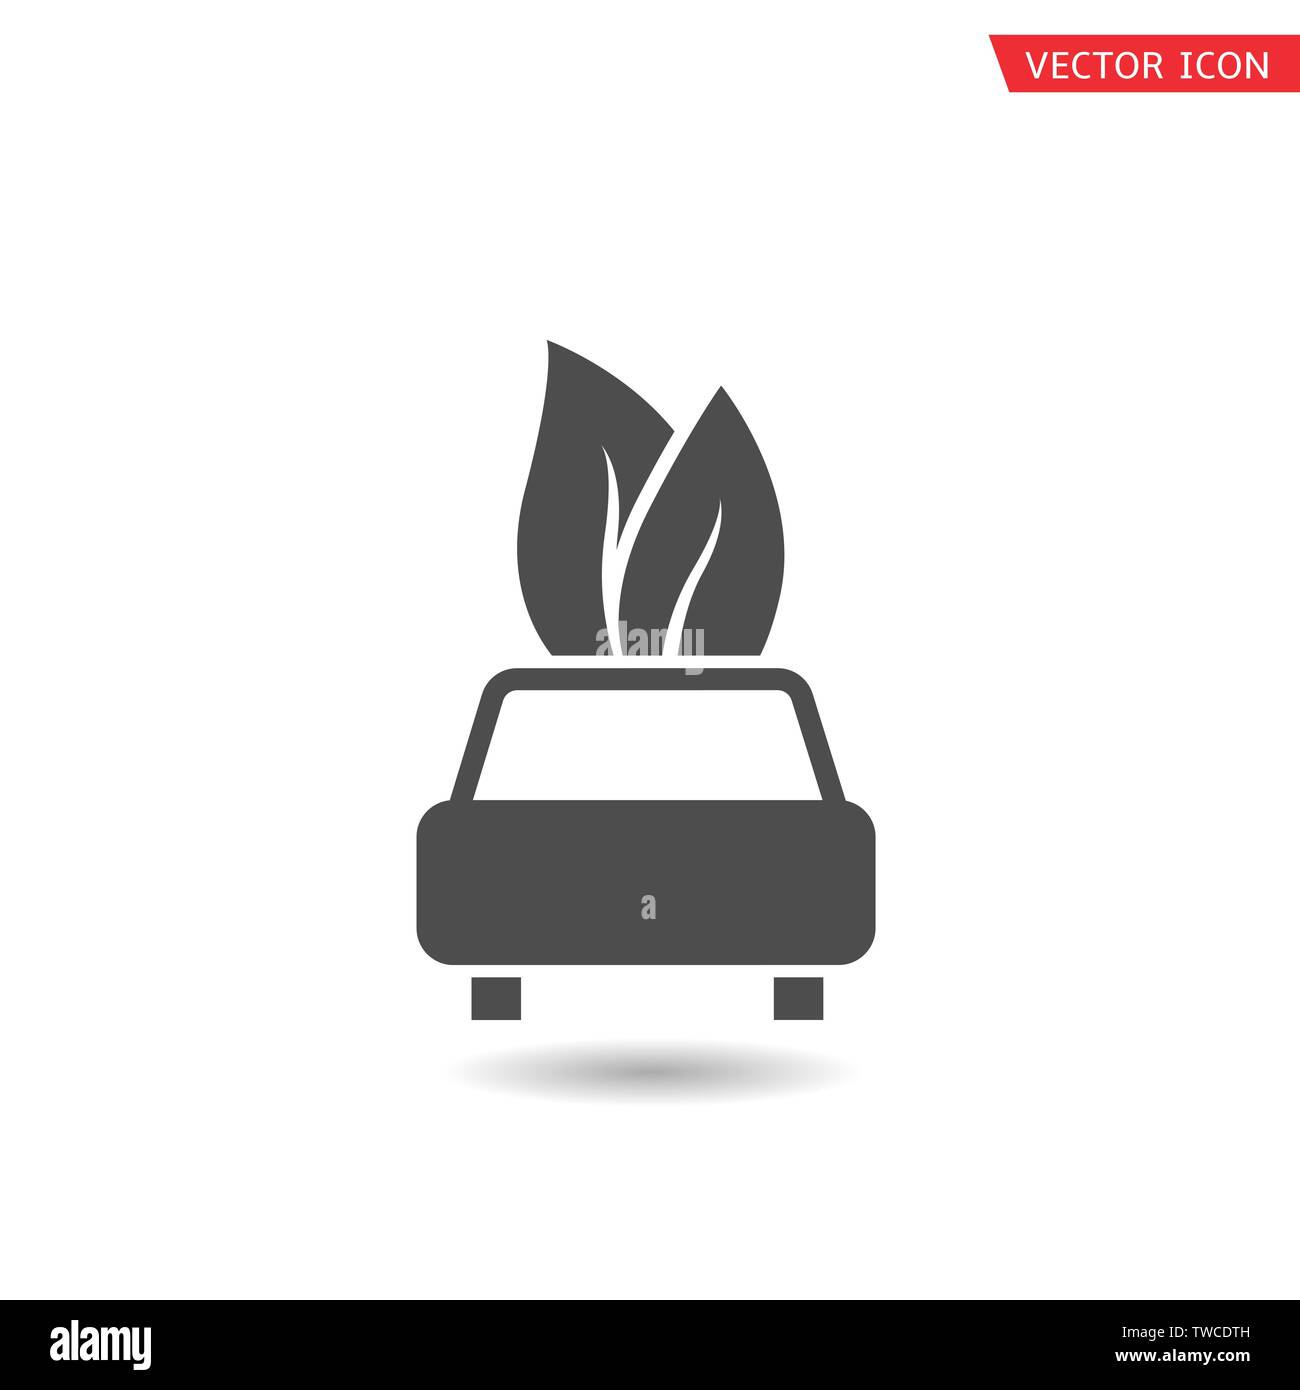 Car with leaves icon. Hybrid auto icon, vector illustration Stock Vector